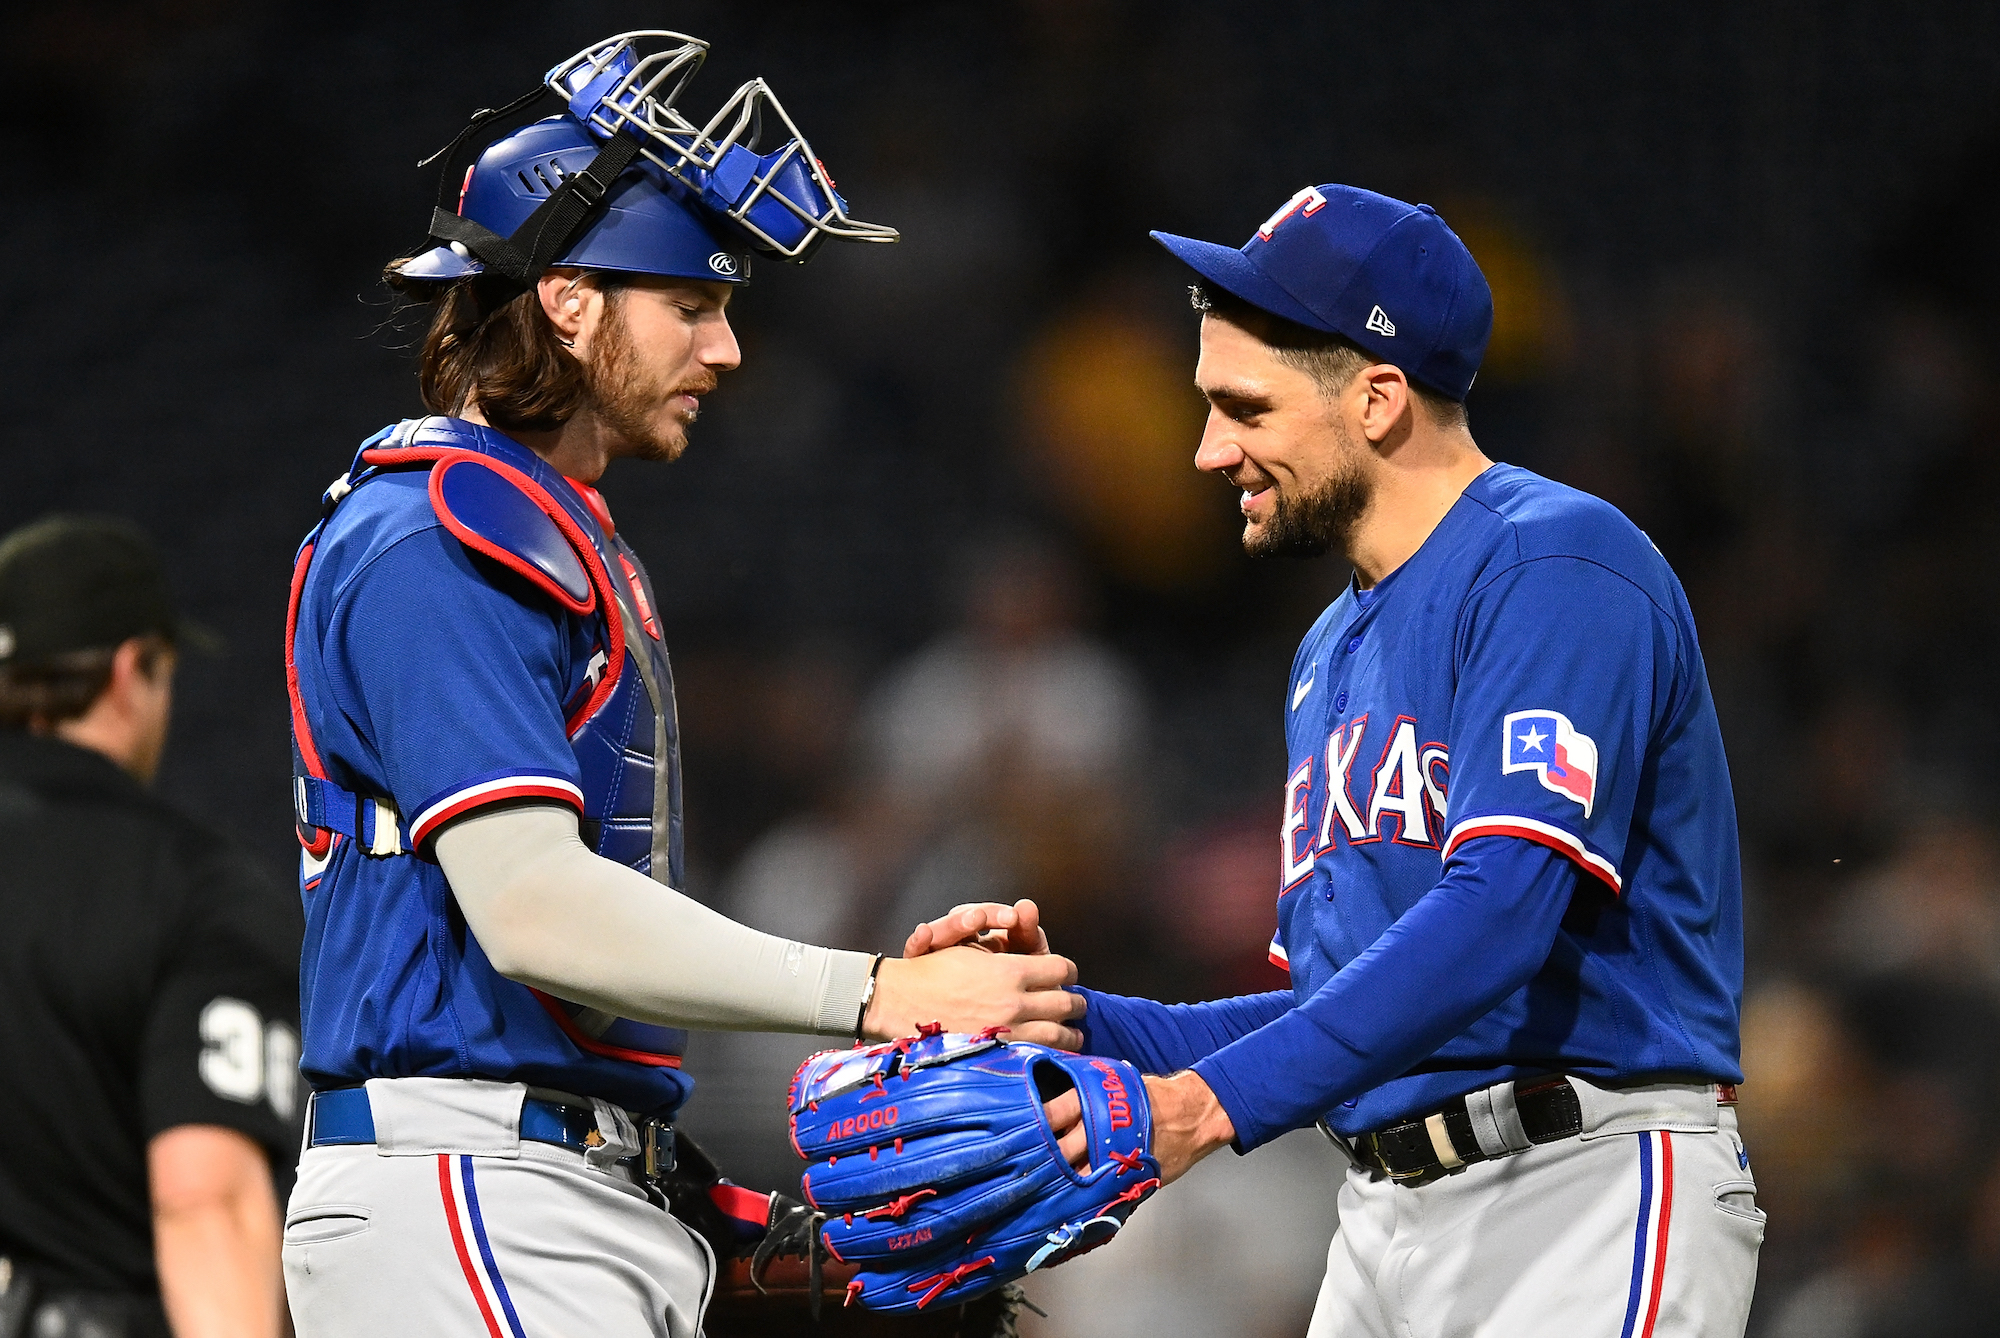 PITTSBURGH, PA - MAY 23: Pitcher Nathan Eovaldi #17 of the Texas Rangers celebrates with Jonah Heim #28 after throwing a 6-1 complete game against the Pittsburgh Pirates at PNC Park on May 23, 2023 in Pittsburgh, Pennsylvania. (Photo by Joe Sargent/Getty Images)